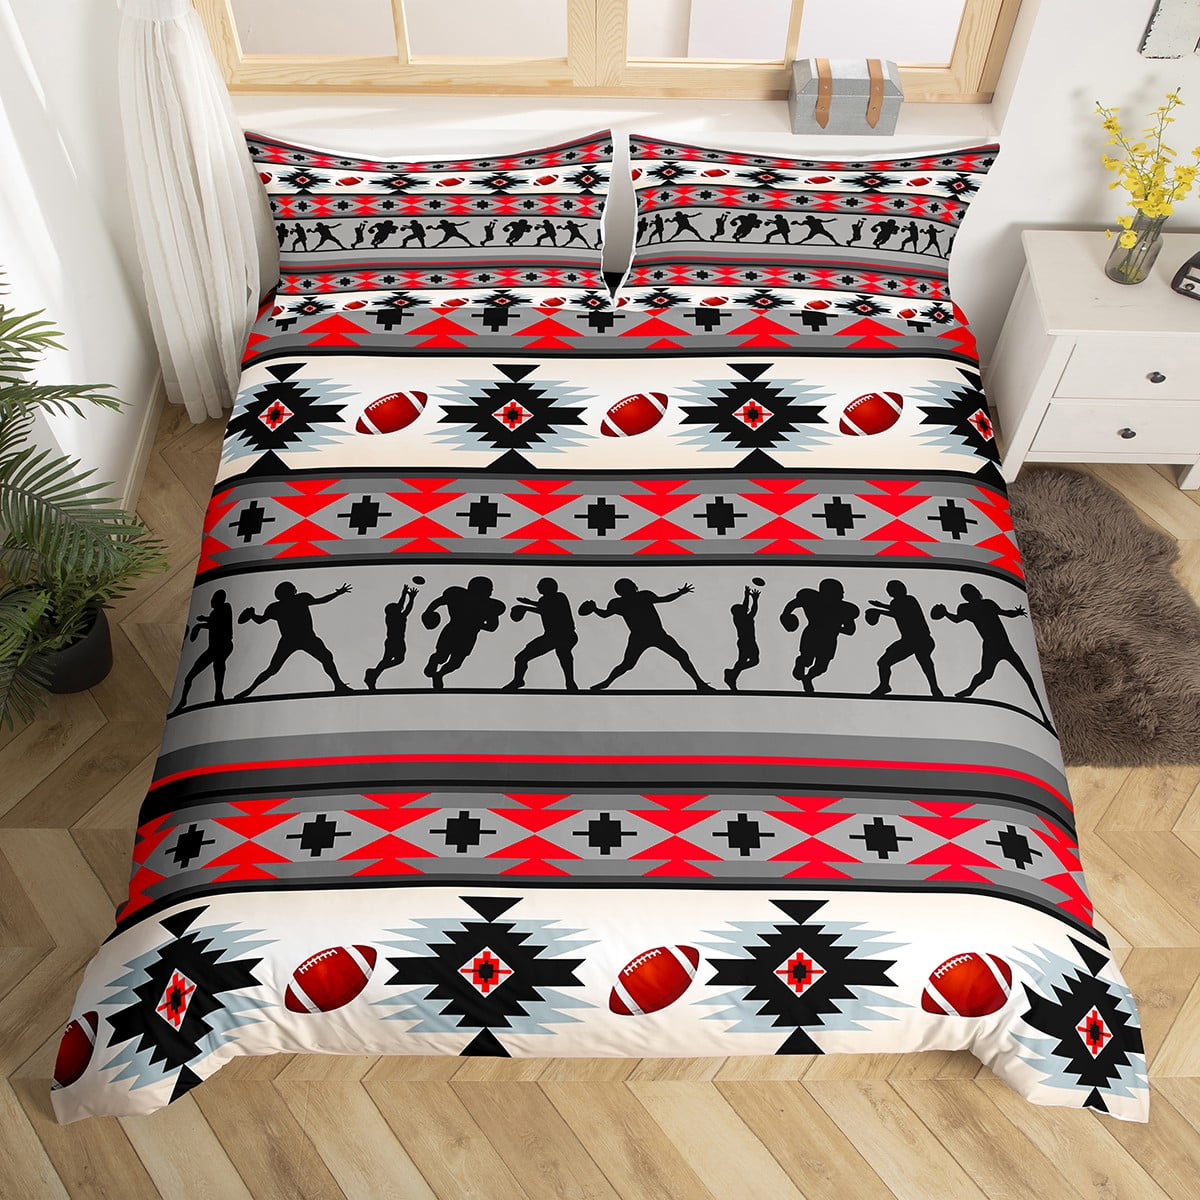 Rugby Ball Duvet Cover Ethnic Tribe Arrow Aztec Bedding Set for ...